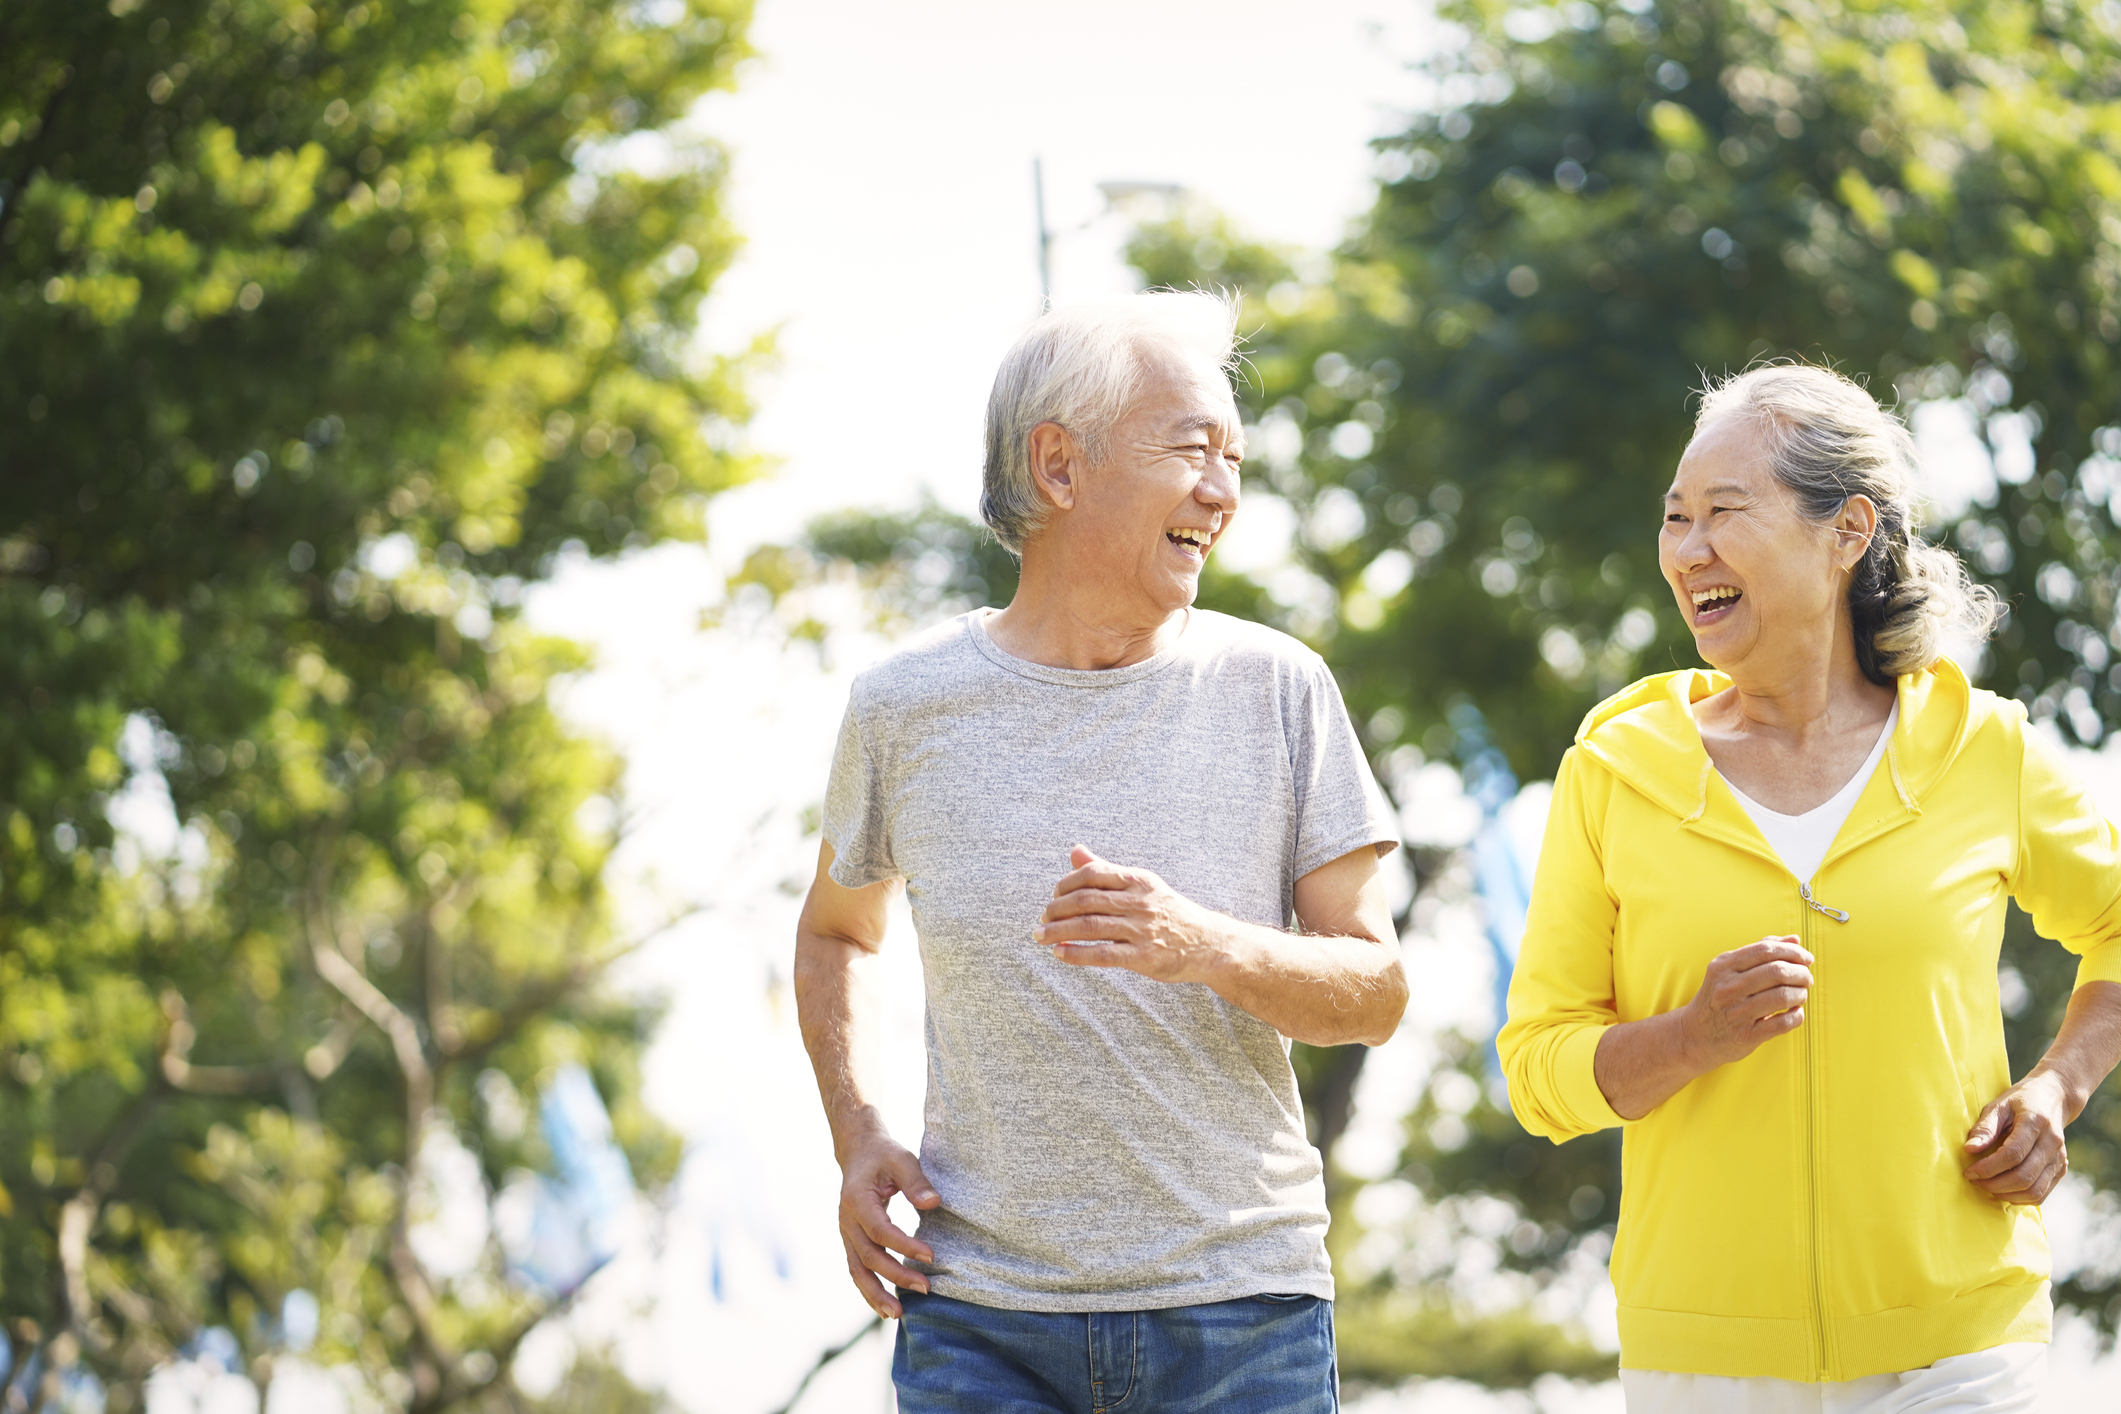 Benefits of Exercise for Seniors with Chronic Health Conditions